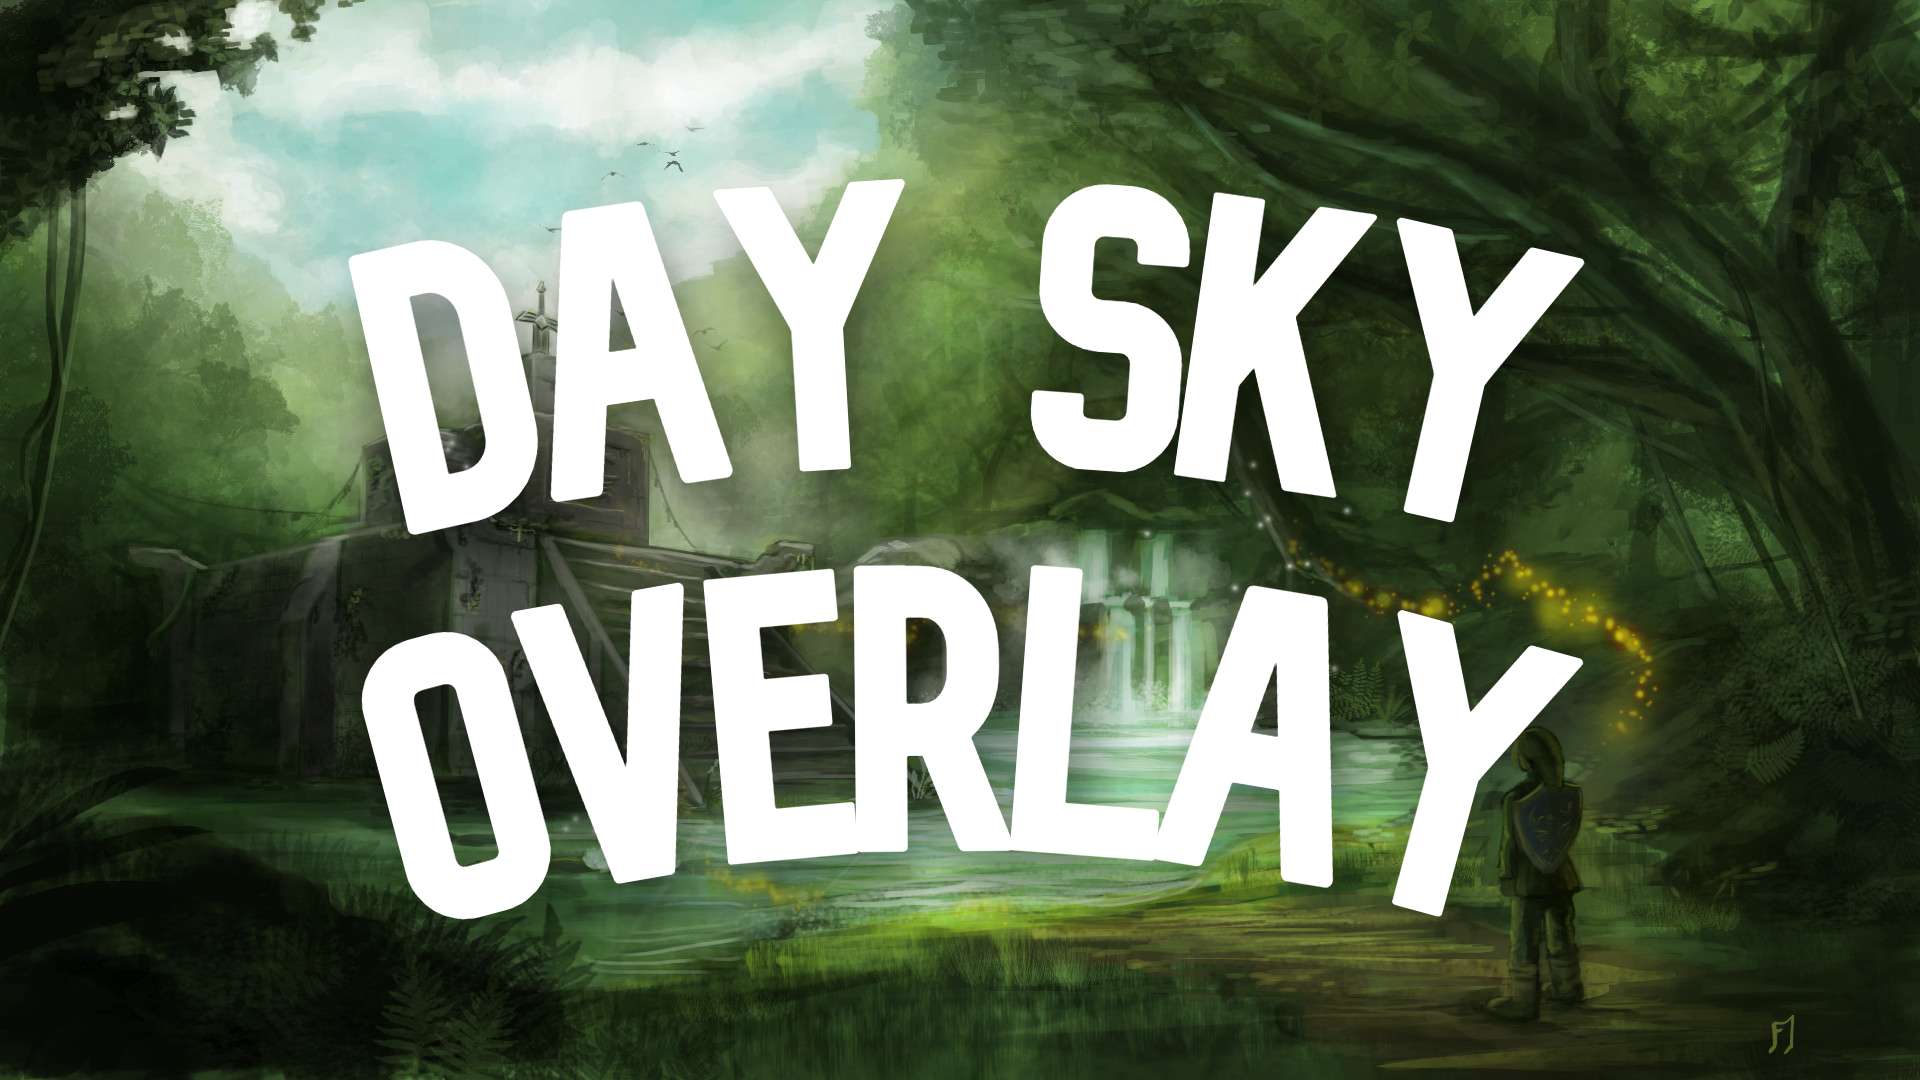 Day Sky Overlay #16 16 by rh56 on PvPRP